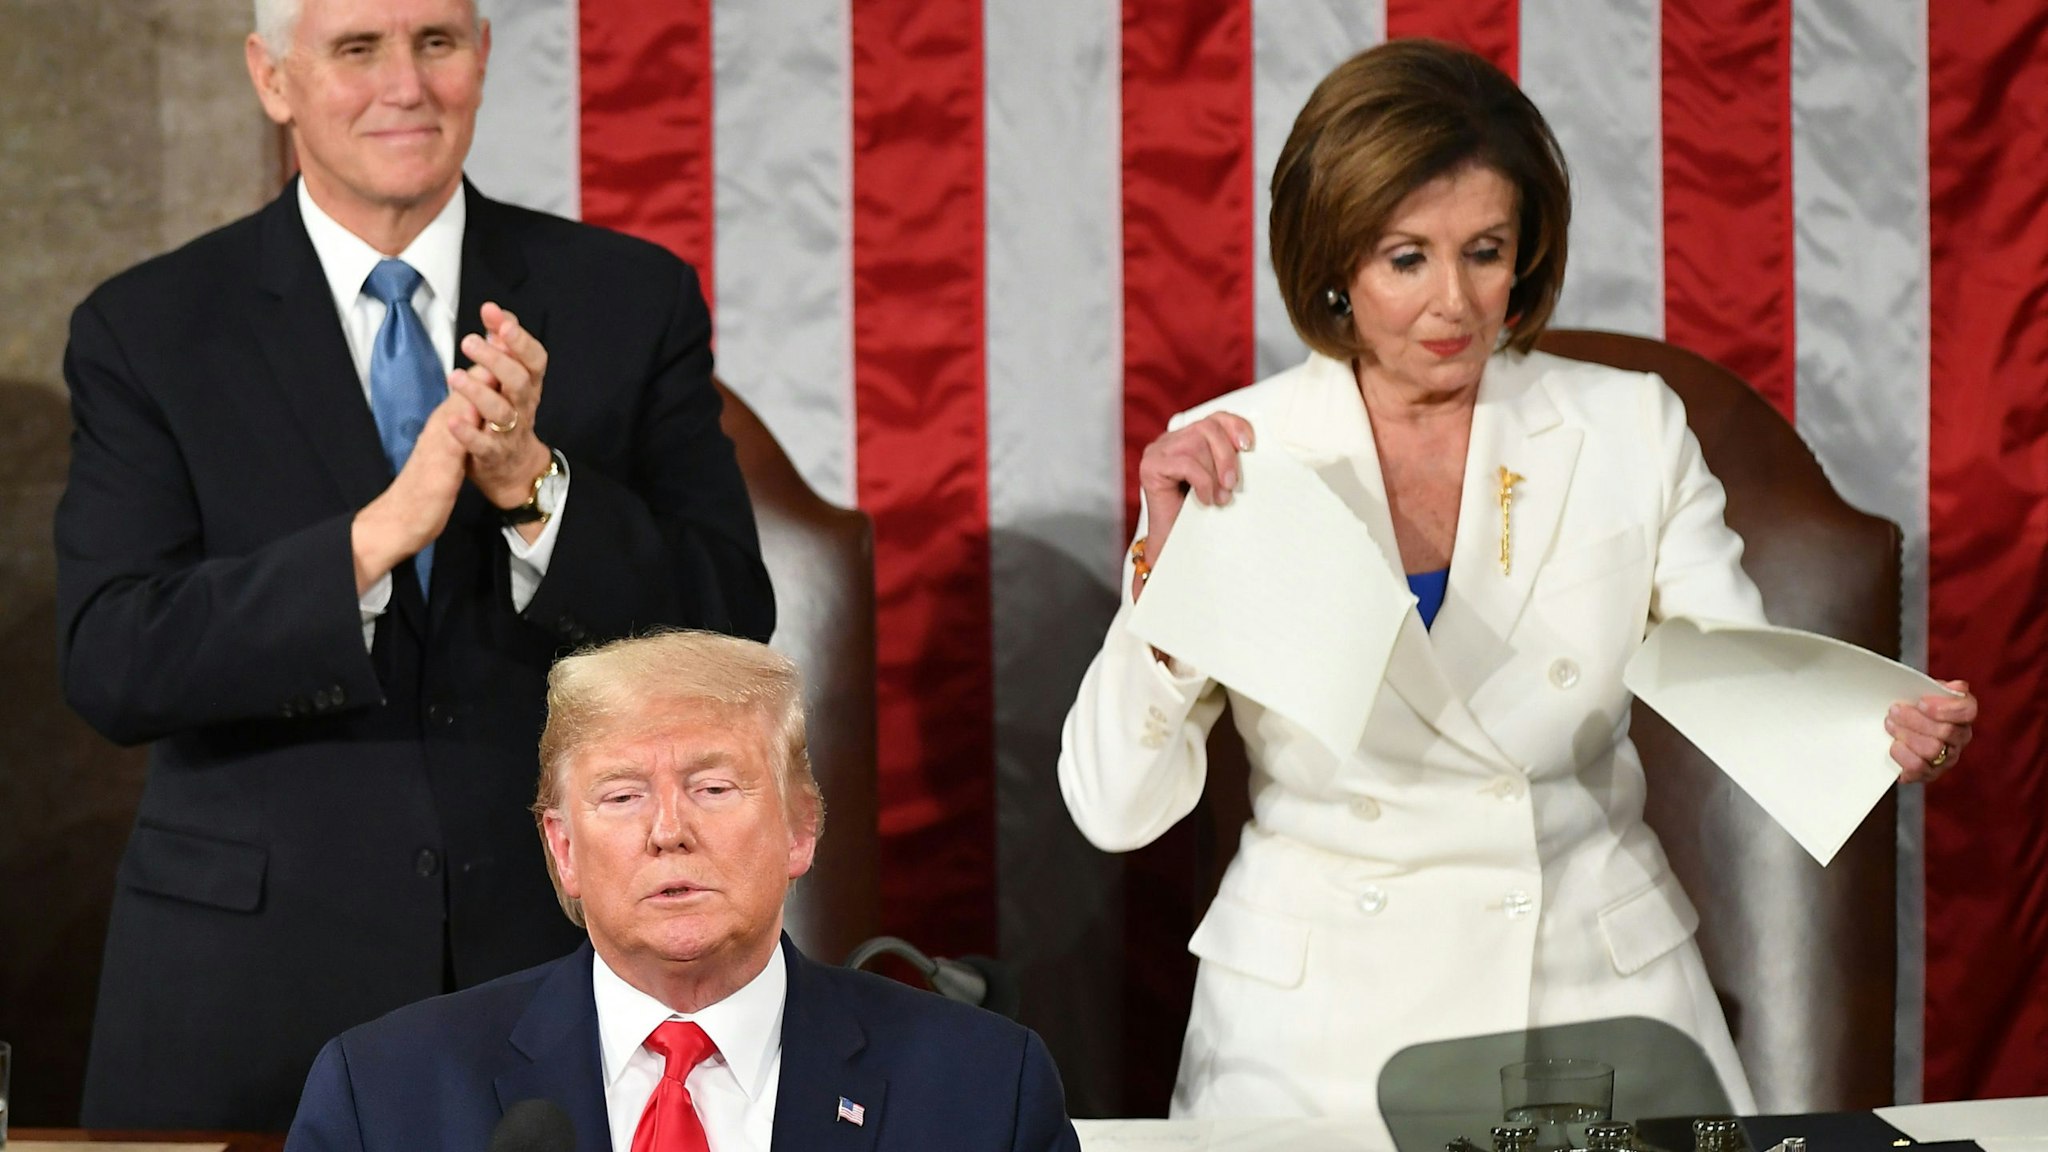 US Vice President Mike Pence claps as Speaker of the US House of Representatives Nancy Pelosi appears to rip a copy of US President Donald Trumps speech after he delivers the State of the Union address at the US Capitol in Washington, DC, on February 4, 2020.